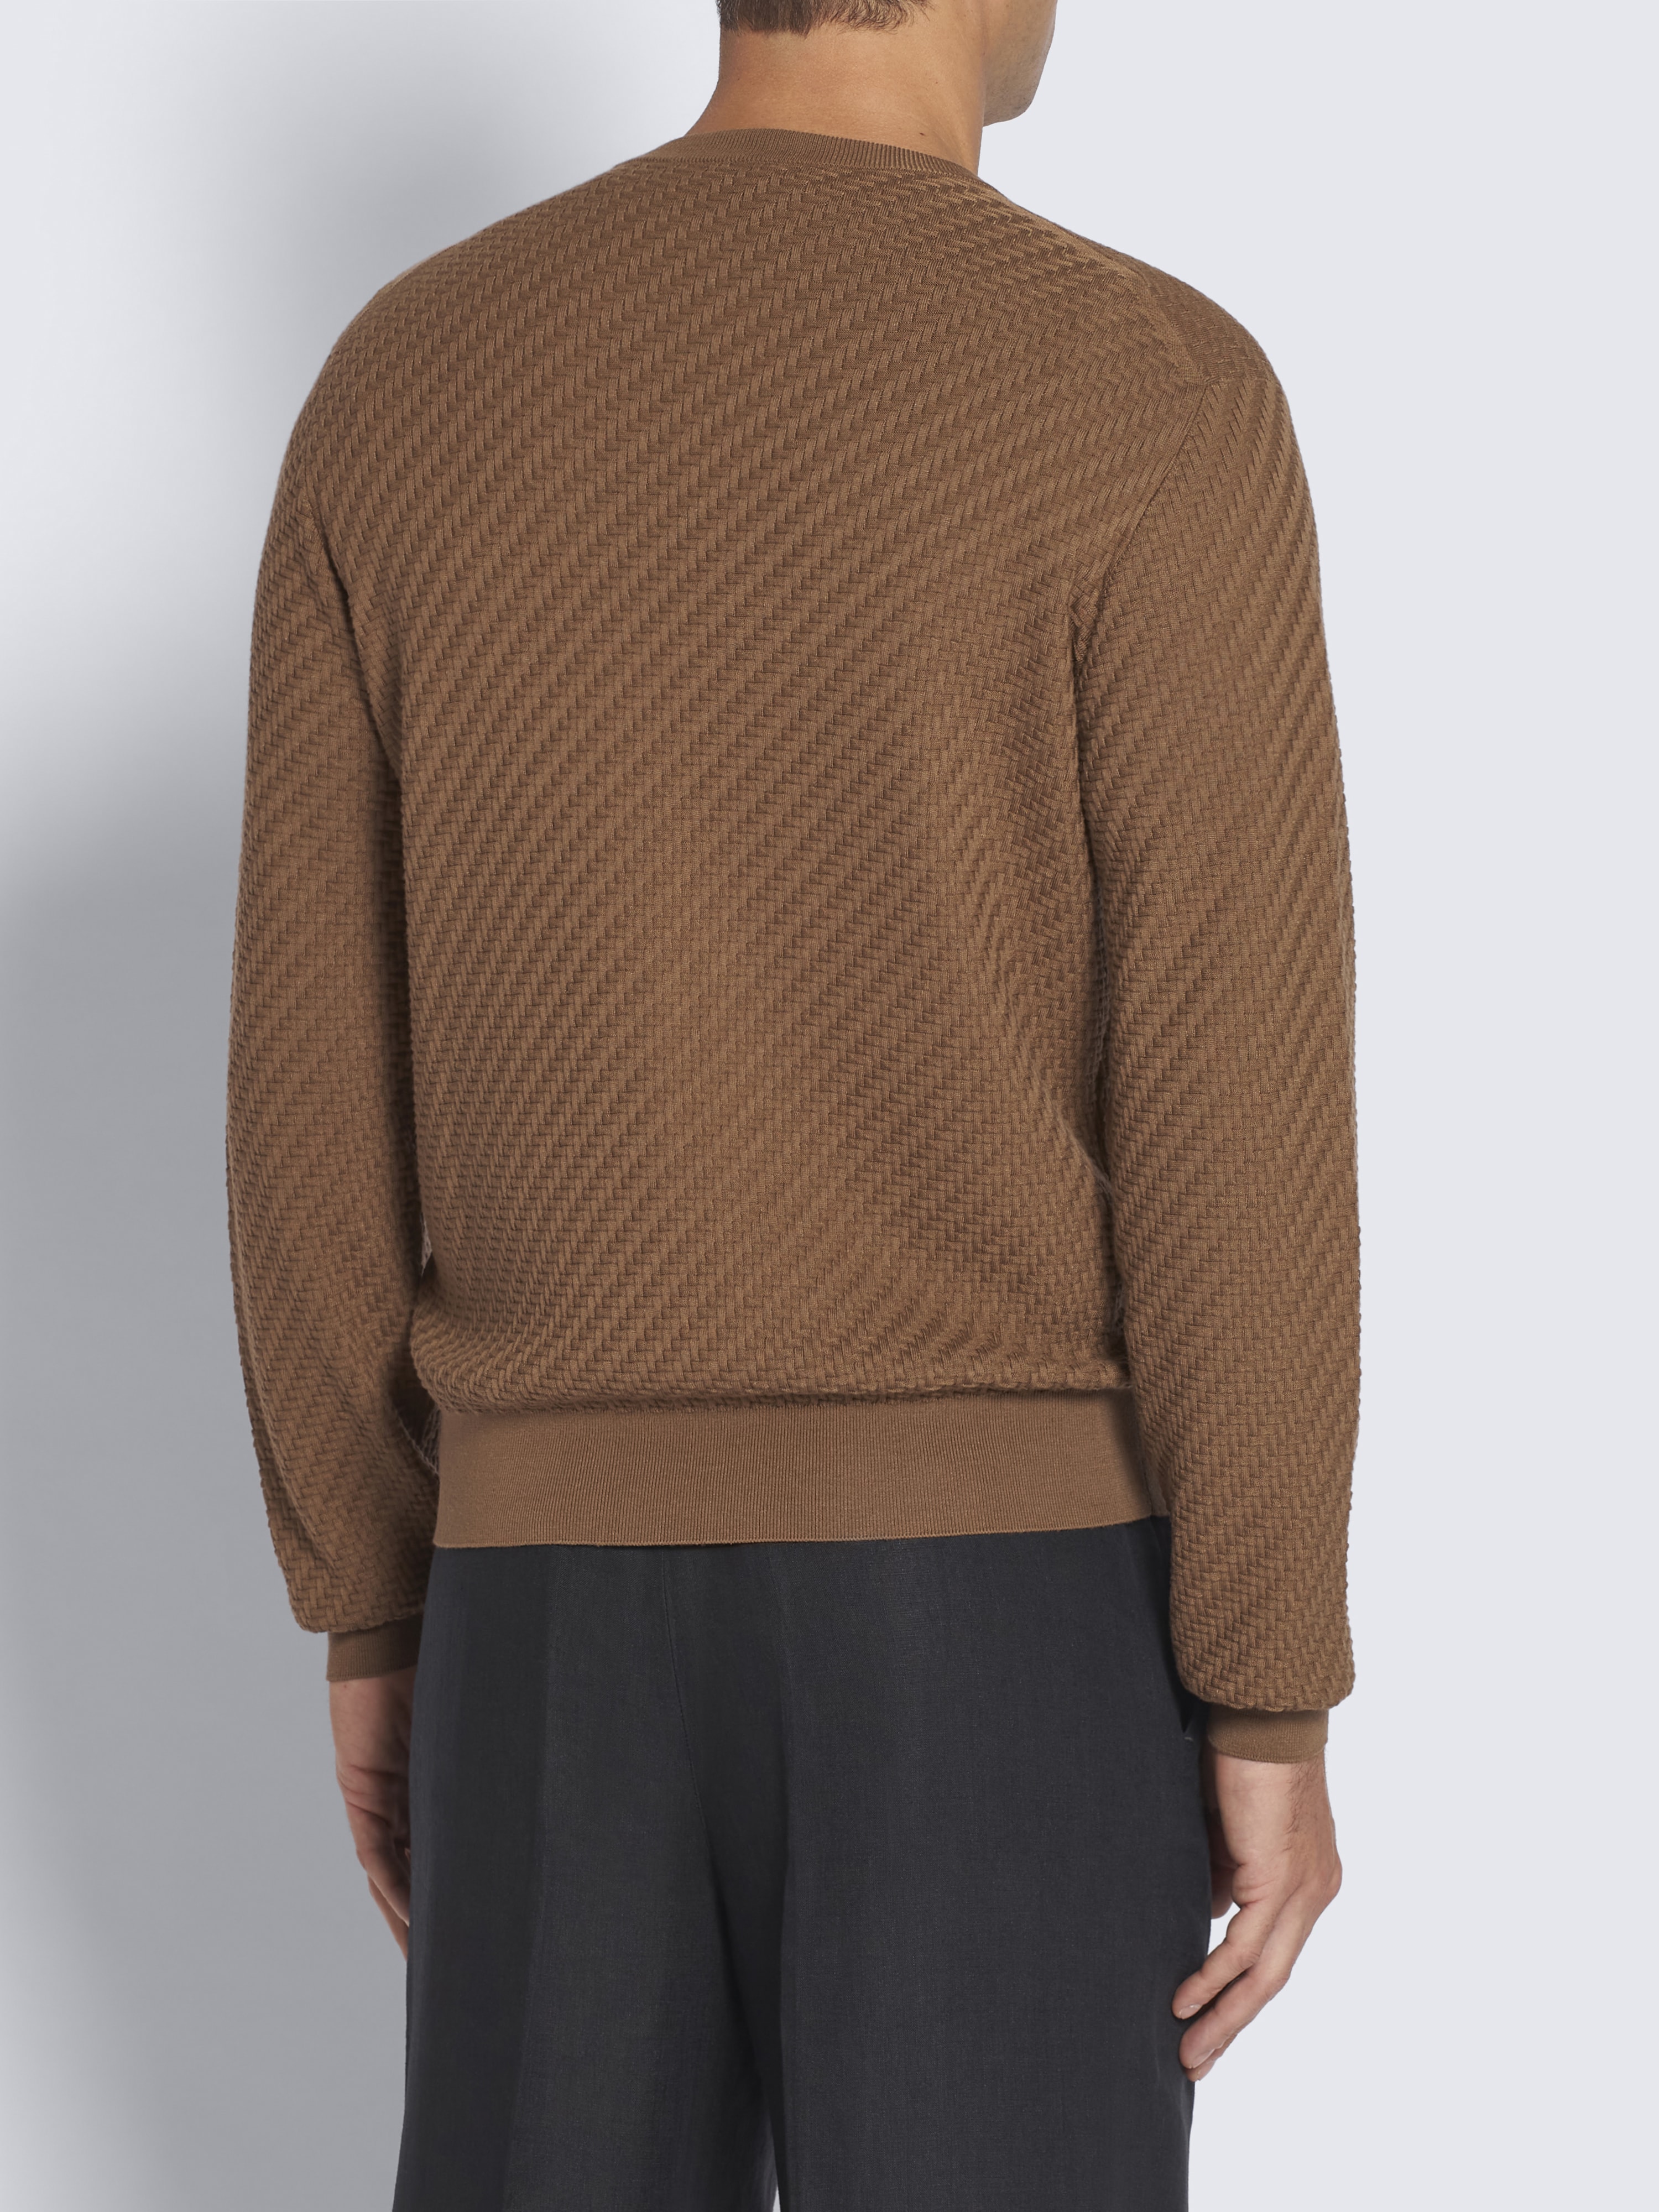 Light brown cotton, silk and cashmere sweater | Brioni® CL